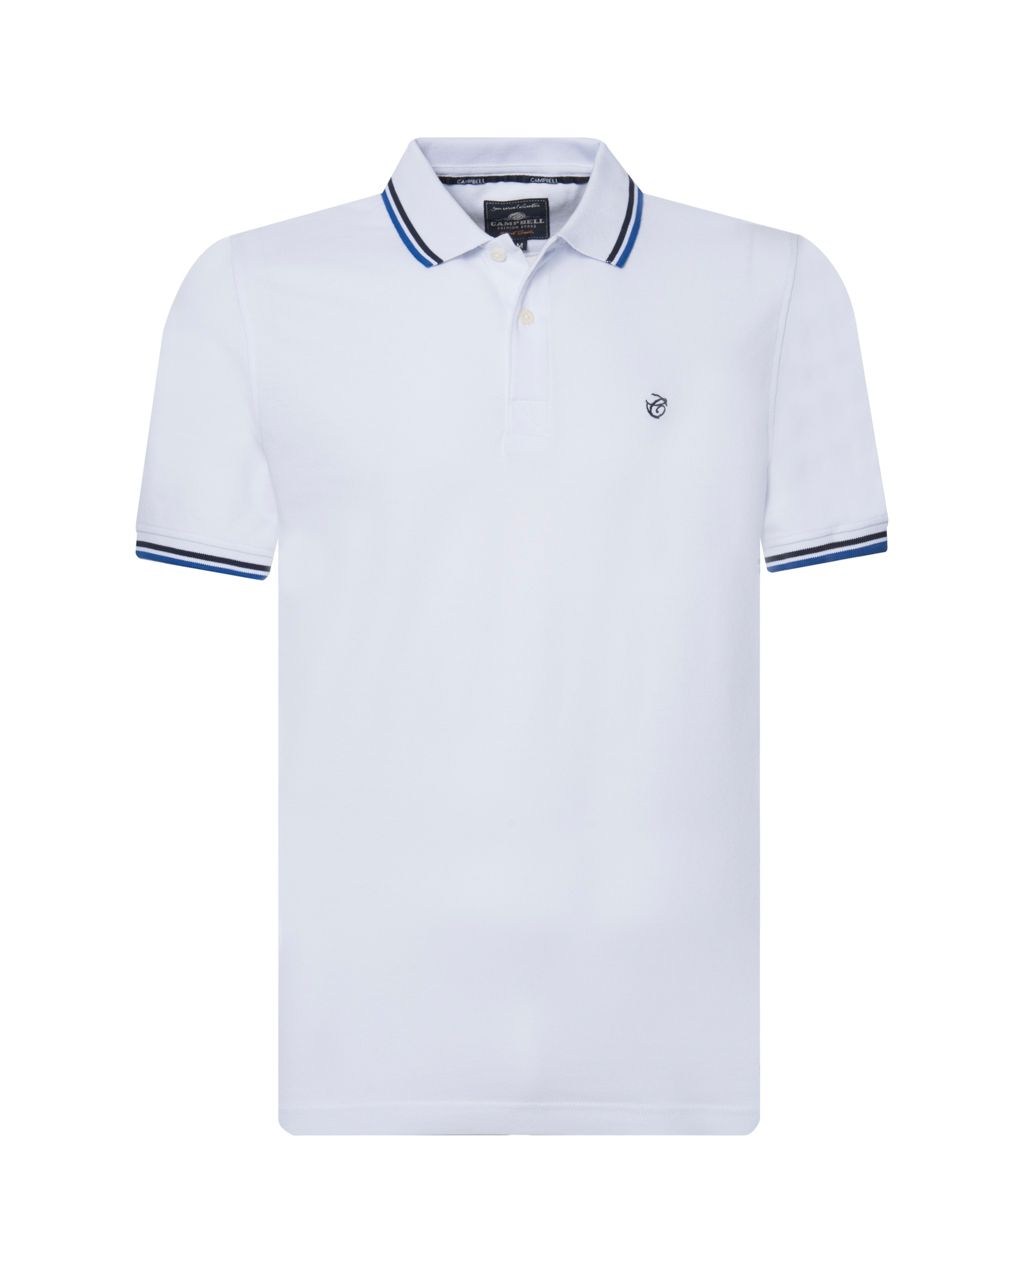 Campbell Classic Leicester Polo KM Briljant White 074096-004-L